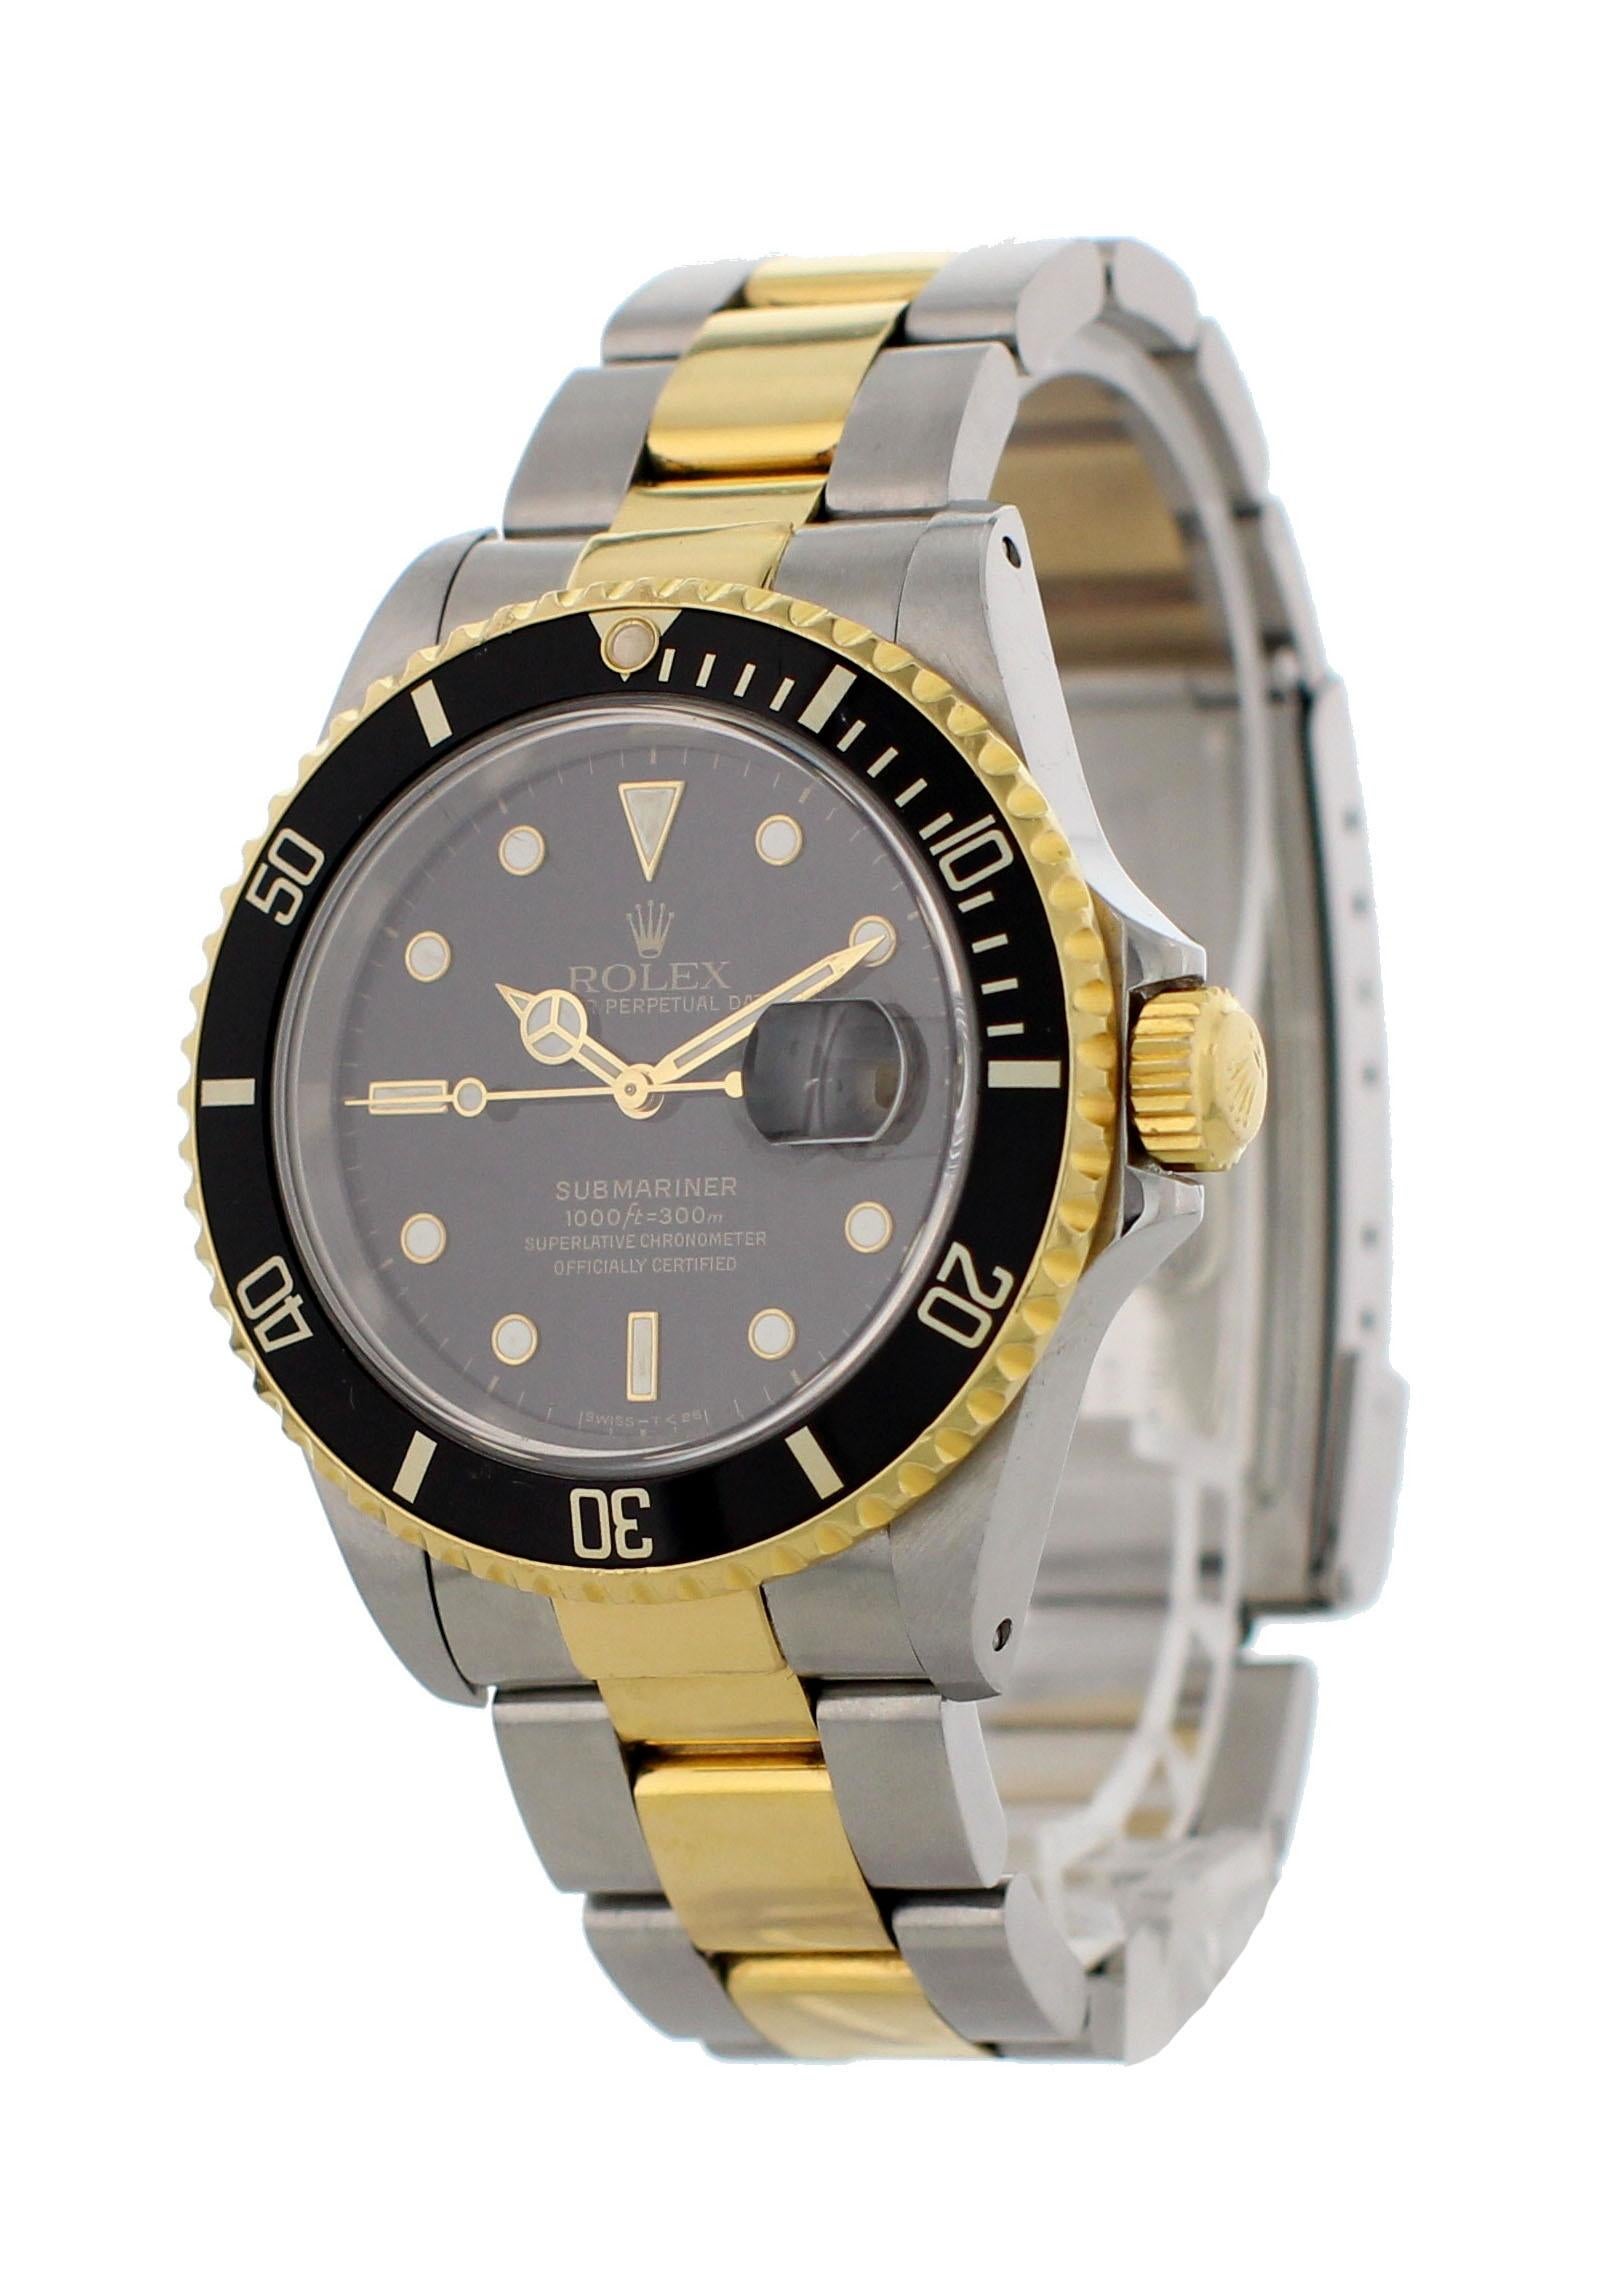 Rolex oyster perpetual Submariner Date 18k 16613 Mens Watch.
40mm Stainless steel case.
18k yellow gold bezel with black bezel insert. 
Black dial with gold luminous hands and markers. 
18k yellow gold and stainless steel Oyster bracelet with a fold